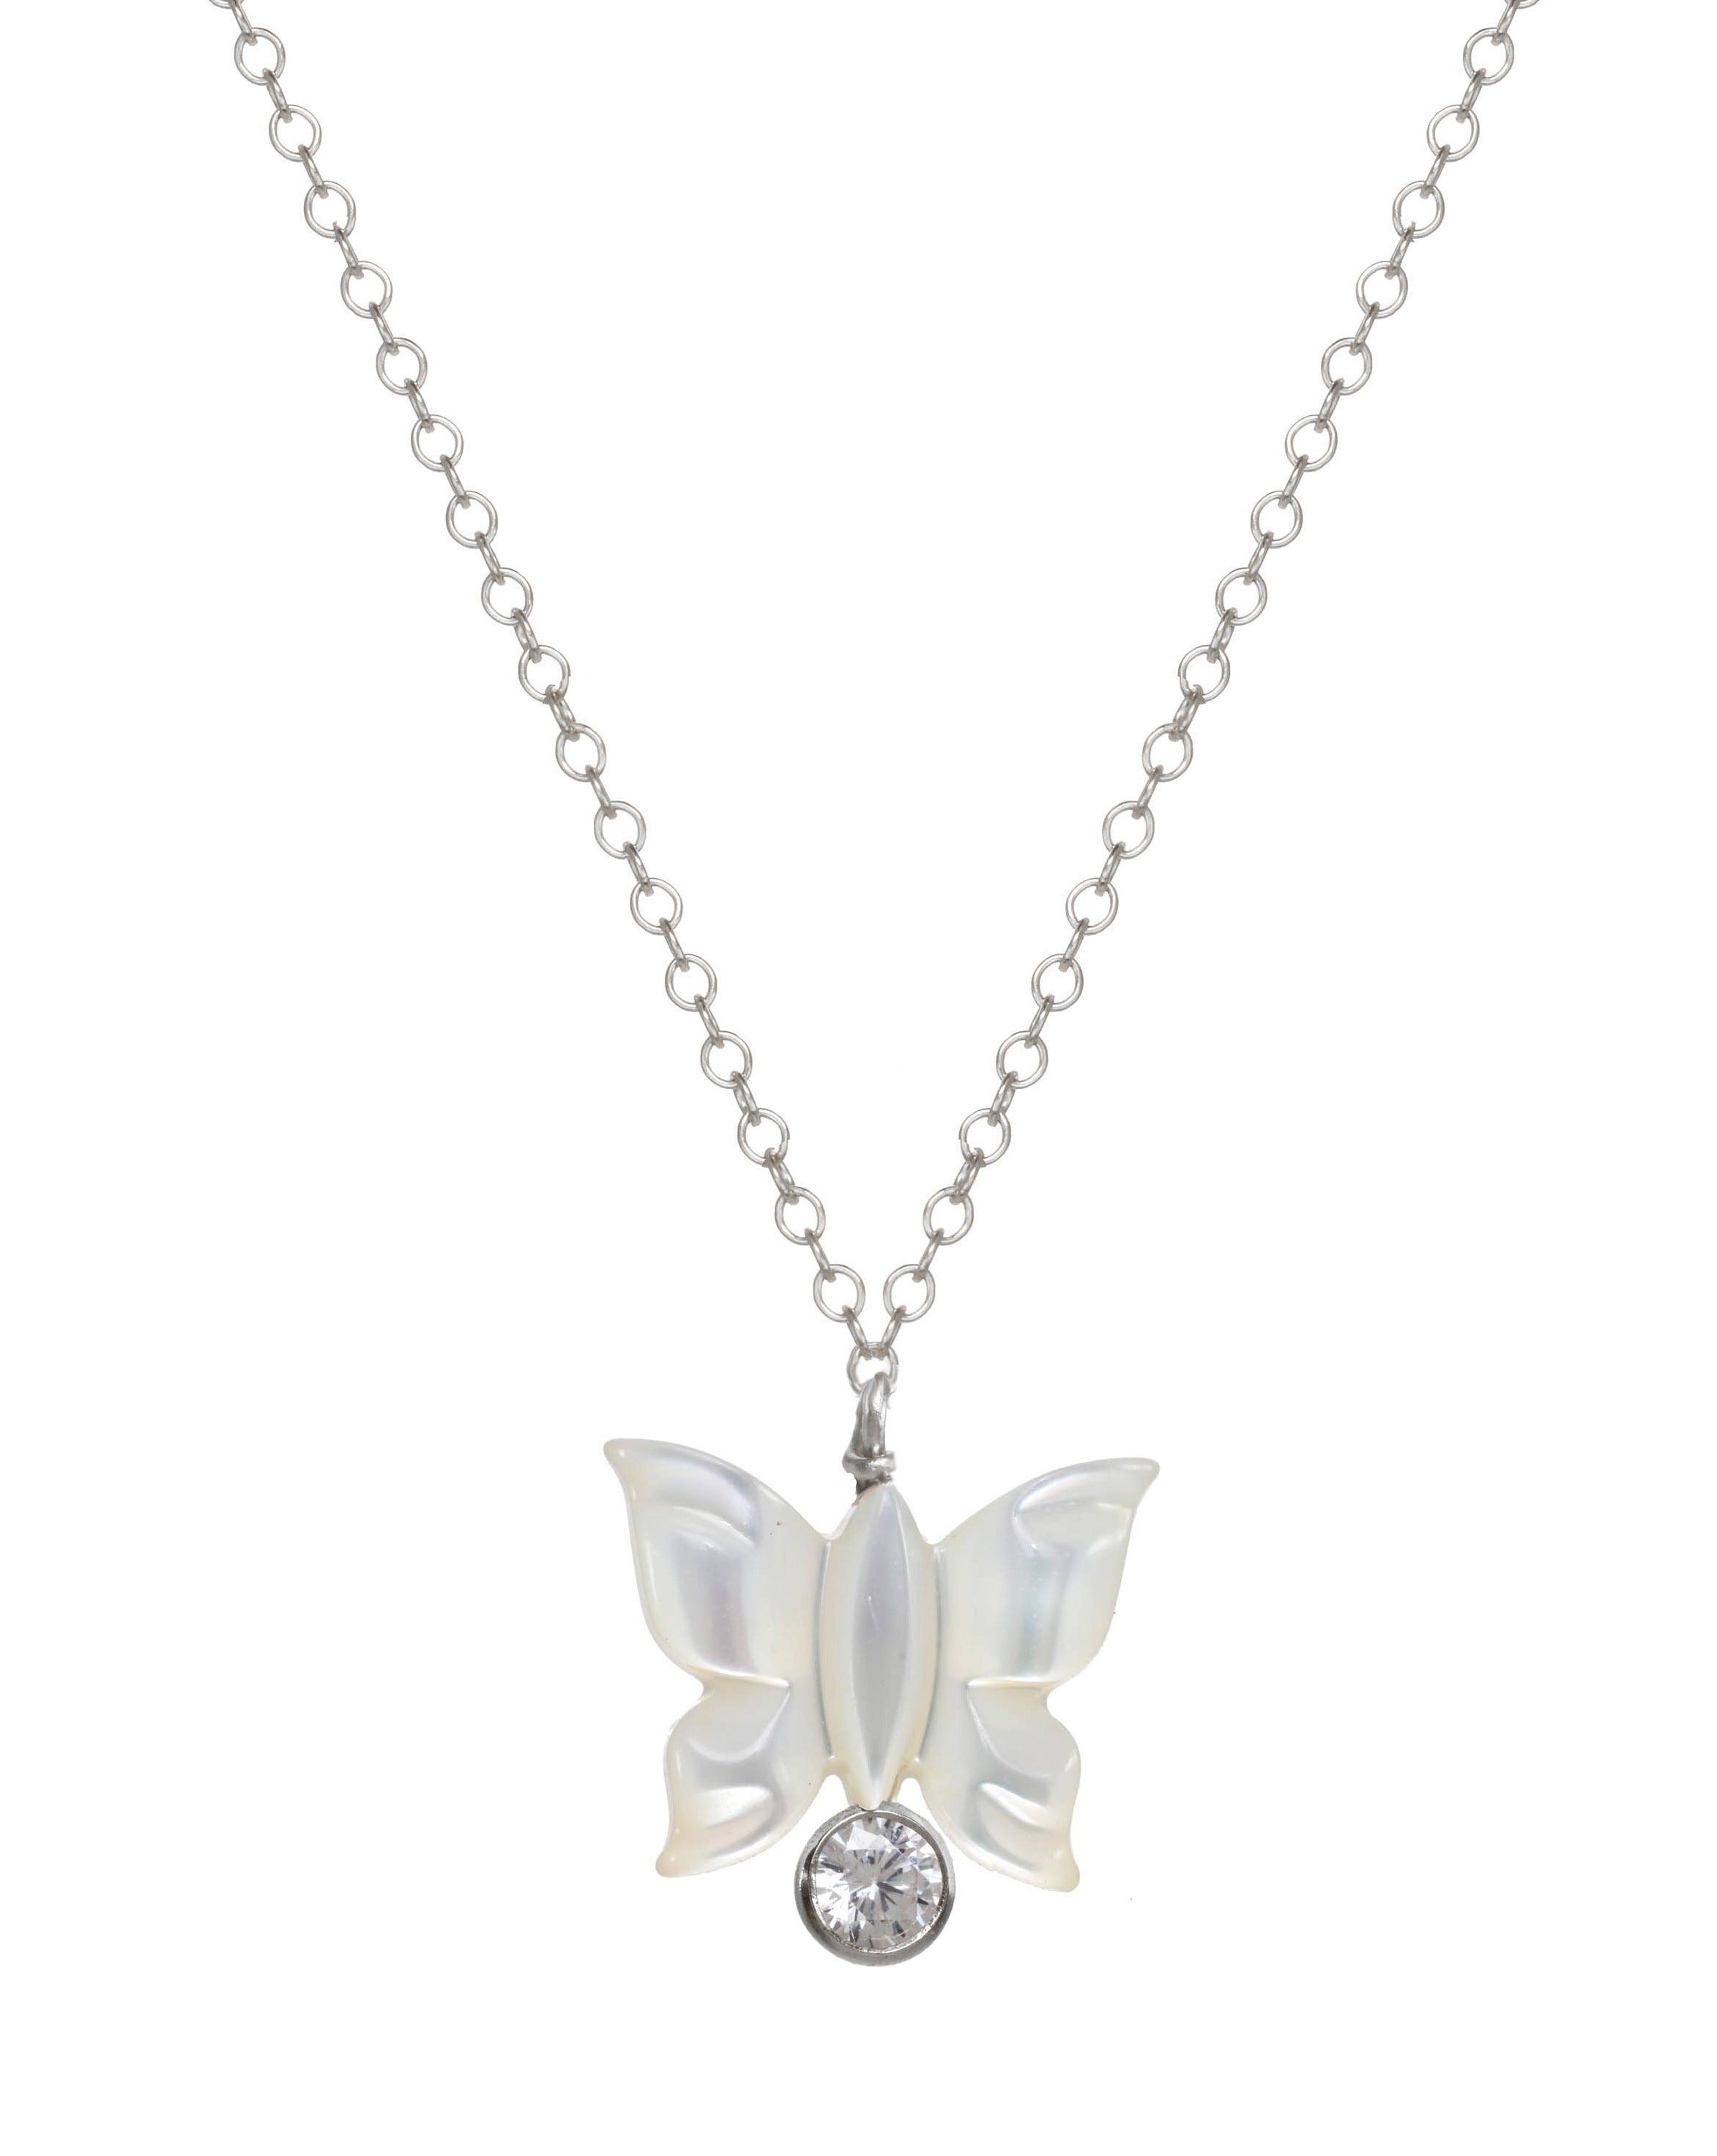 Halo Necklace by KOZAKH. A 16 to 18 inch adjustable length necklace in Sterling Silver, featuring a hand-carved Mother of Pearl butterfly charm and a 3mm Cubic Zirconia bezel.